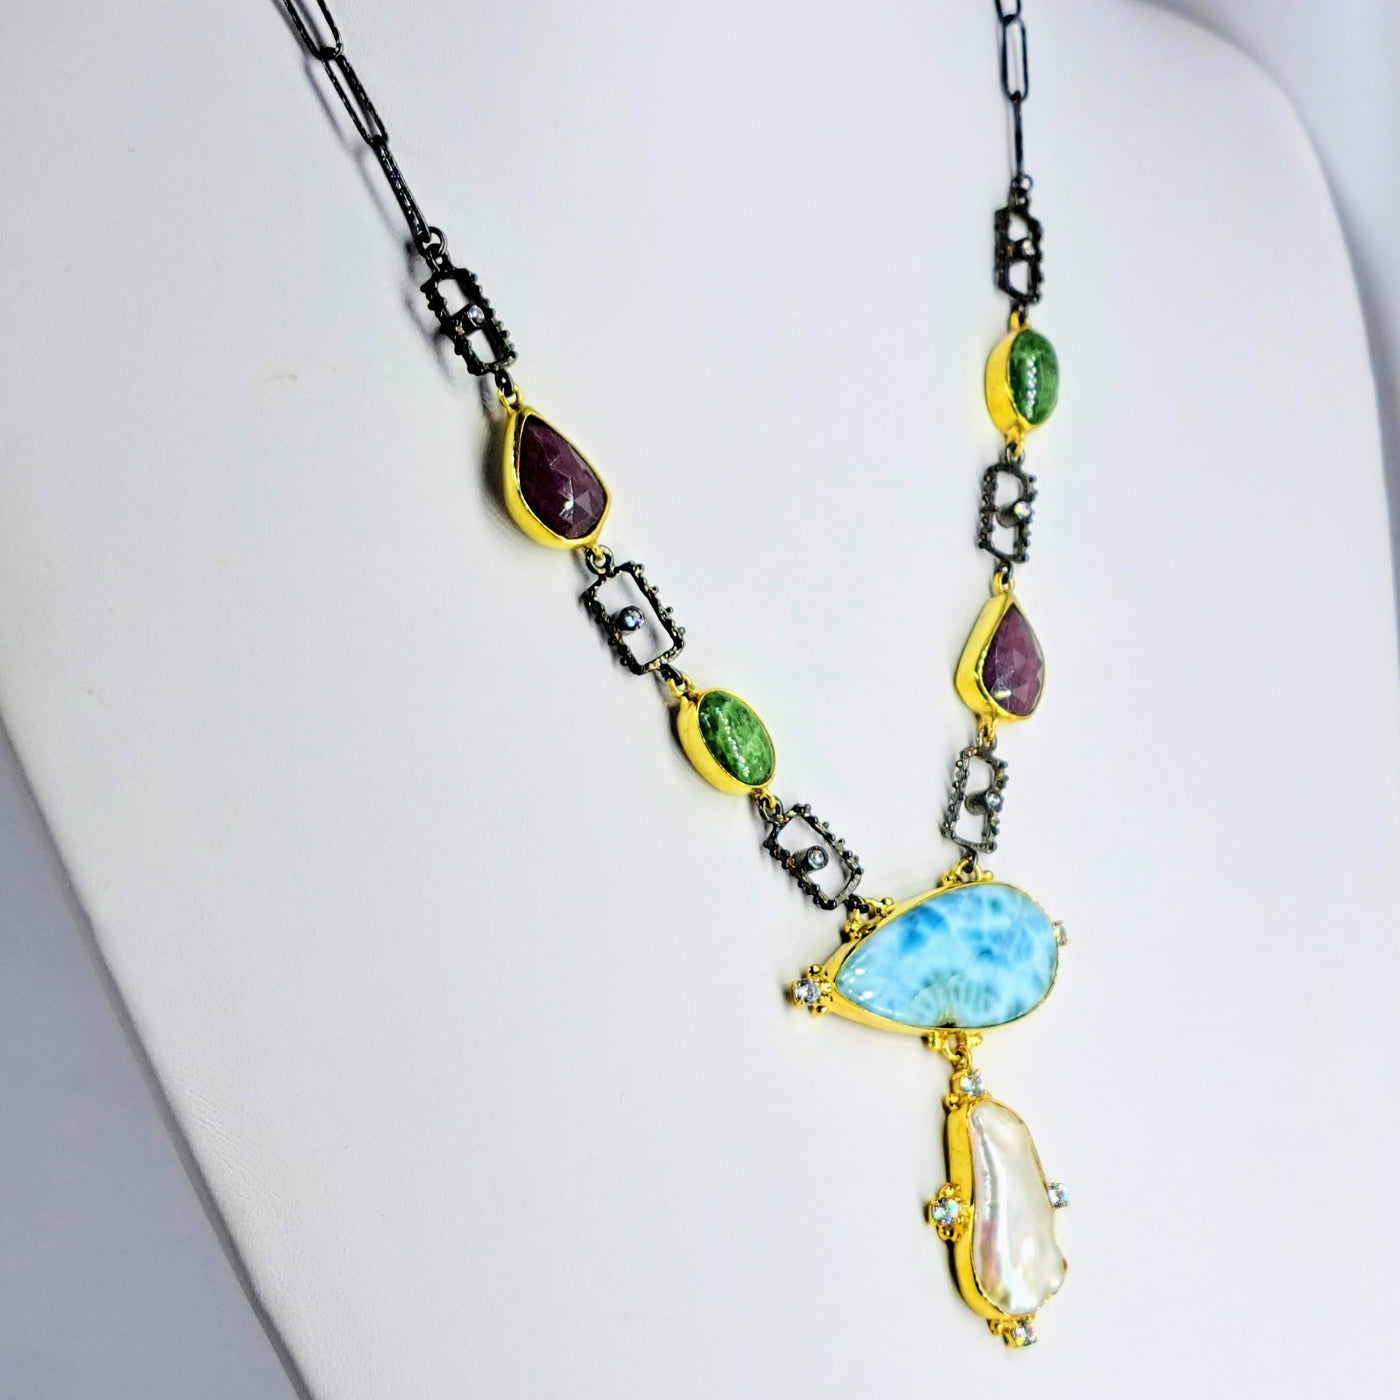 "Key West Casual" Up to 20" Necklace - Larimar, Baroque Pearl, Ruby, Chrome Diopside, Zircon Stone, Black Sterling, 18k